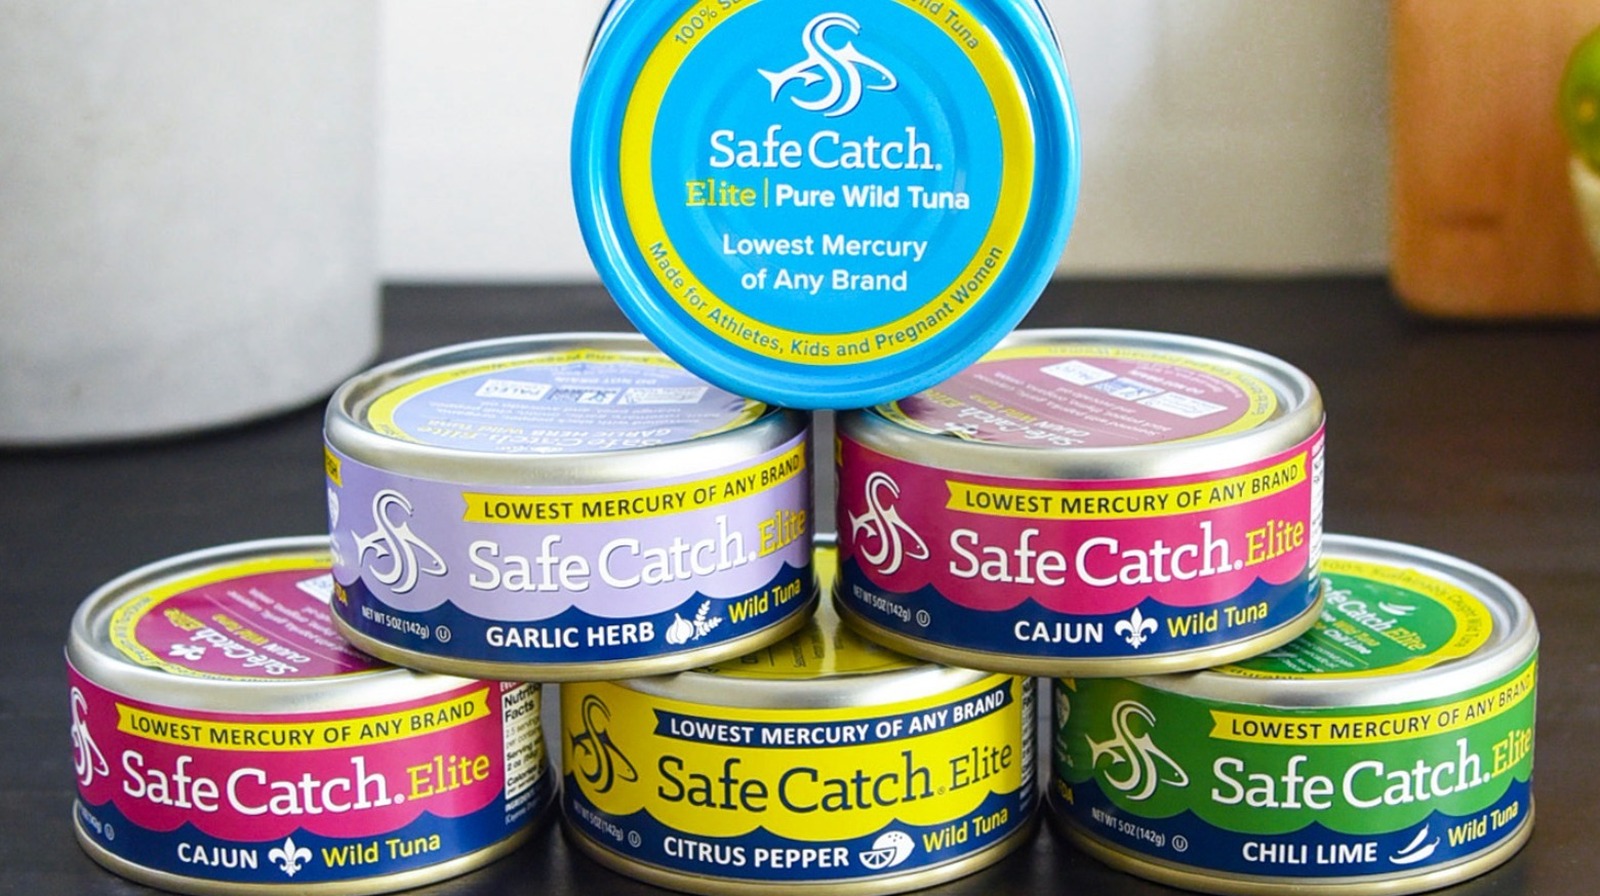 What Happened To Safe Catch After Shark Tank?